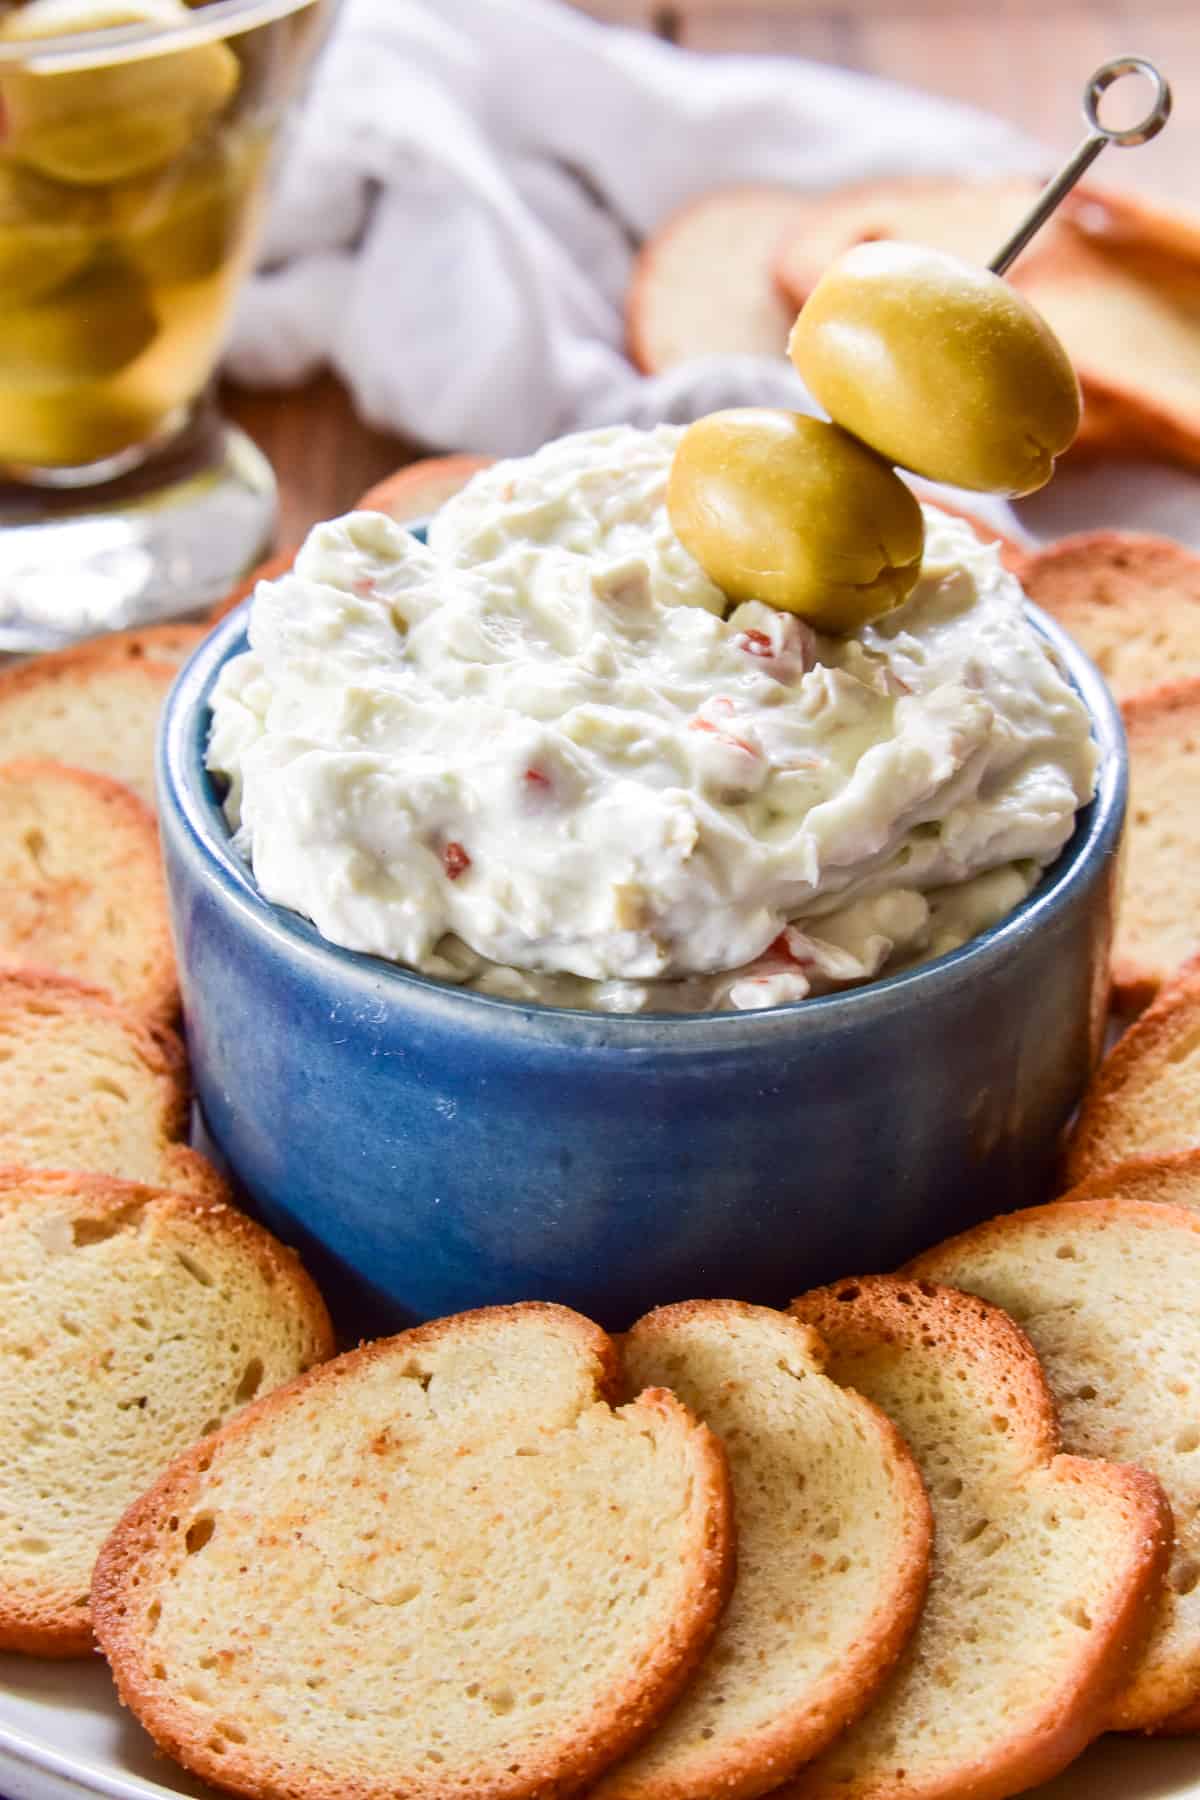 Dirty Martini Dip with olives and bagel chips for dipping